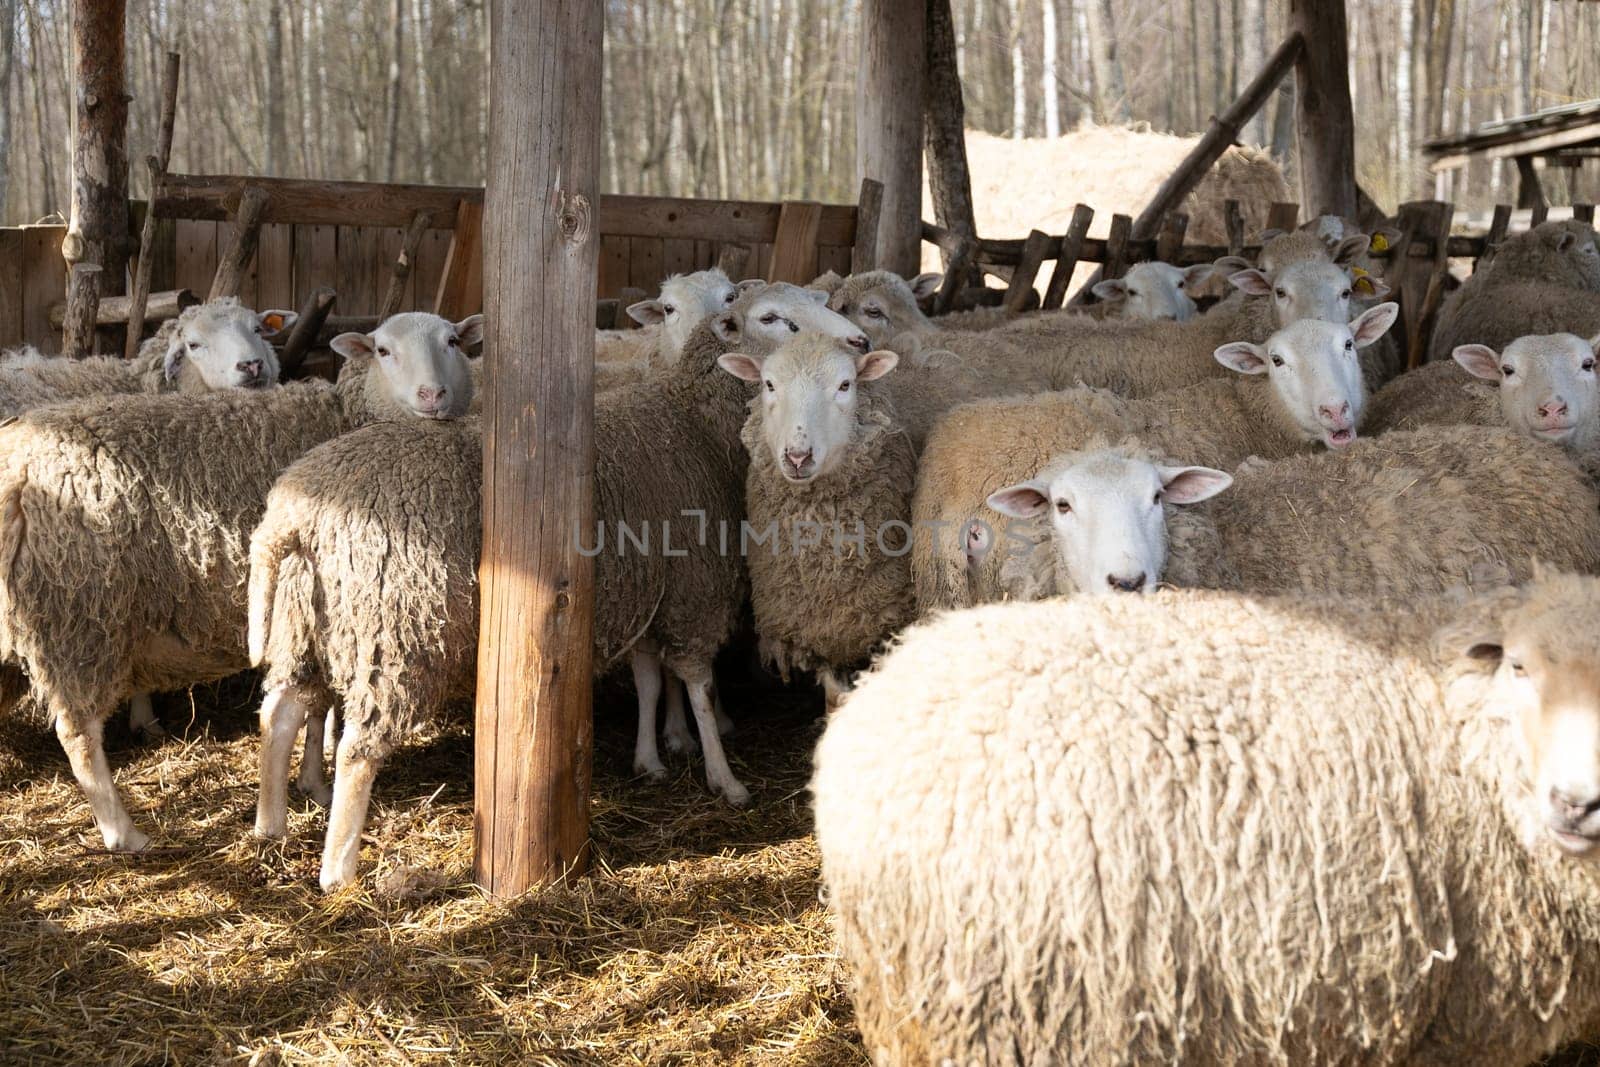 A Herd of Sheep Standing Together by TRMK